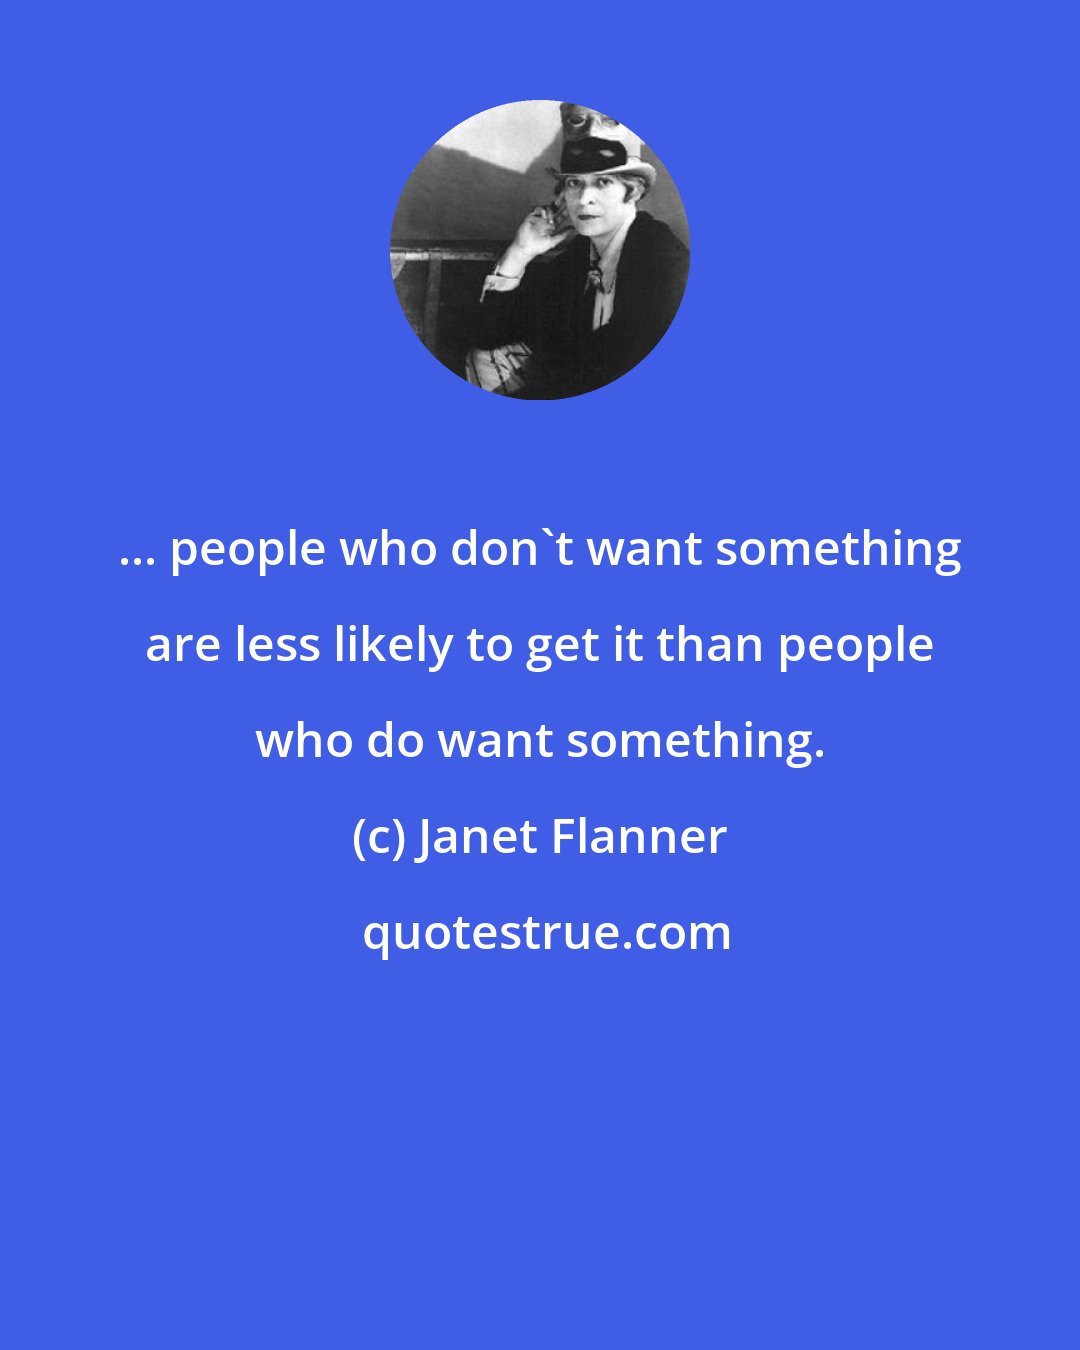 Janet Flanner: ... people who don't want something are less likely to get it than people who do want something.